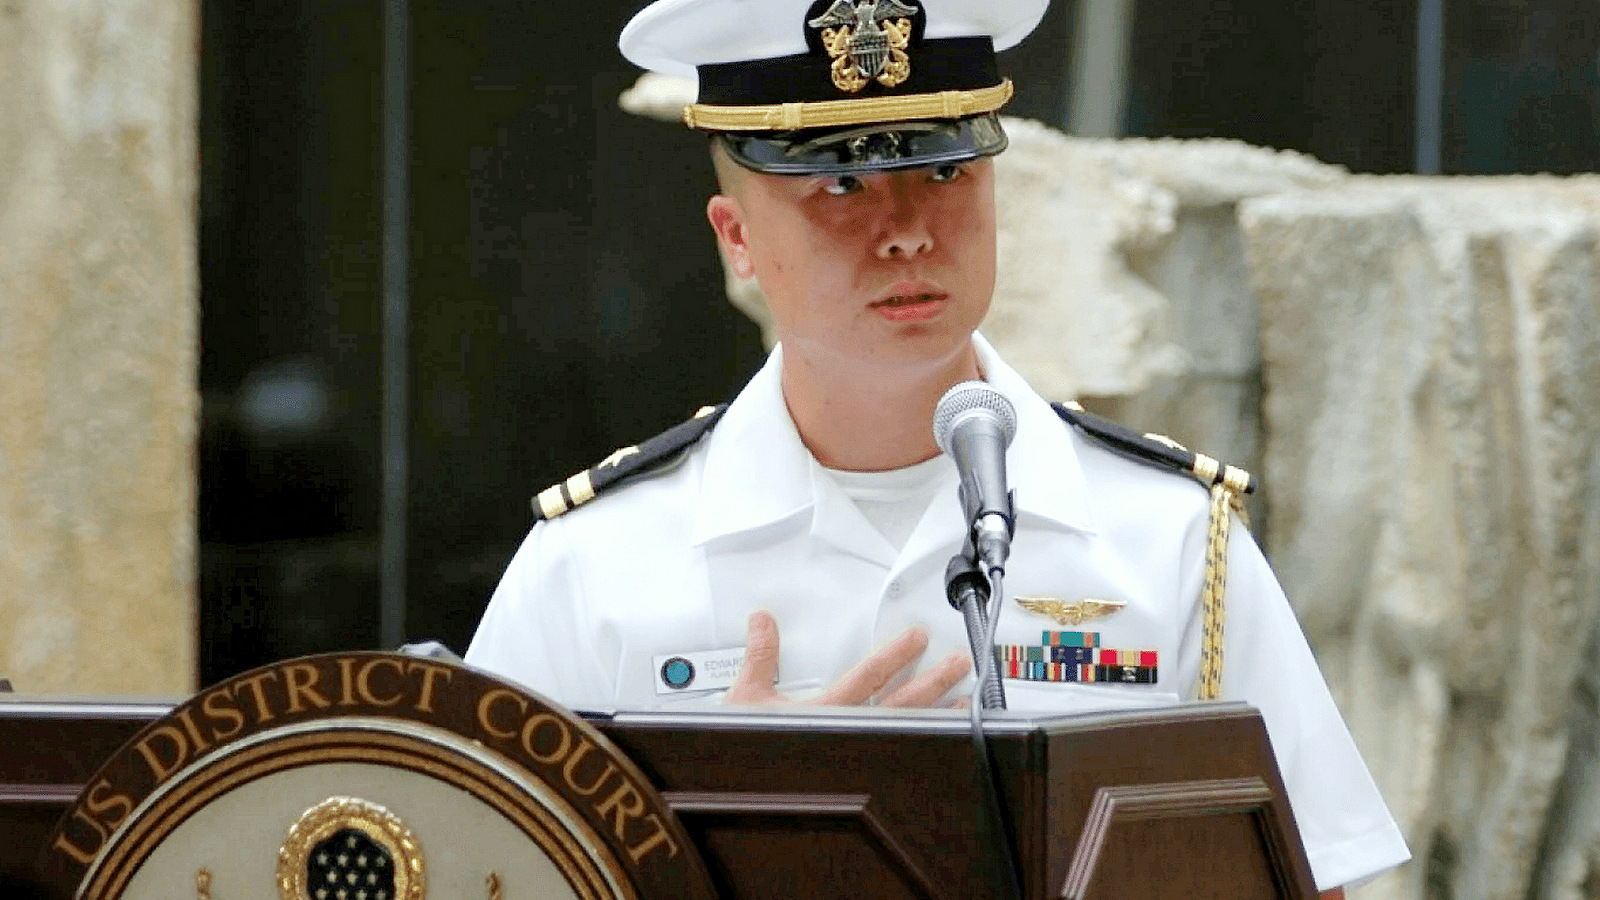 In this Dec. 3, 2008 photo released by the U.S. Navy, Lt. Edward Lin, a native of Taiwan speaks. The U.S. military has charged Lin with espionage for allegedly passing military secrets to China or Taiwan, U.S. defense officials said Monday, April 11, 2016. (U.S. Navy/MC1 Sarah Murphy via AP)